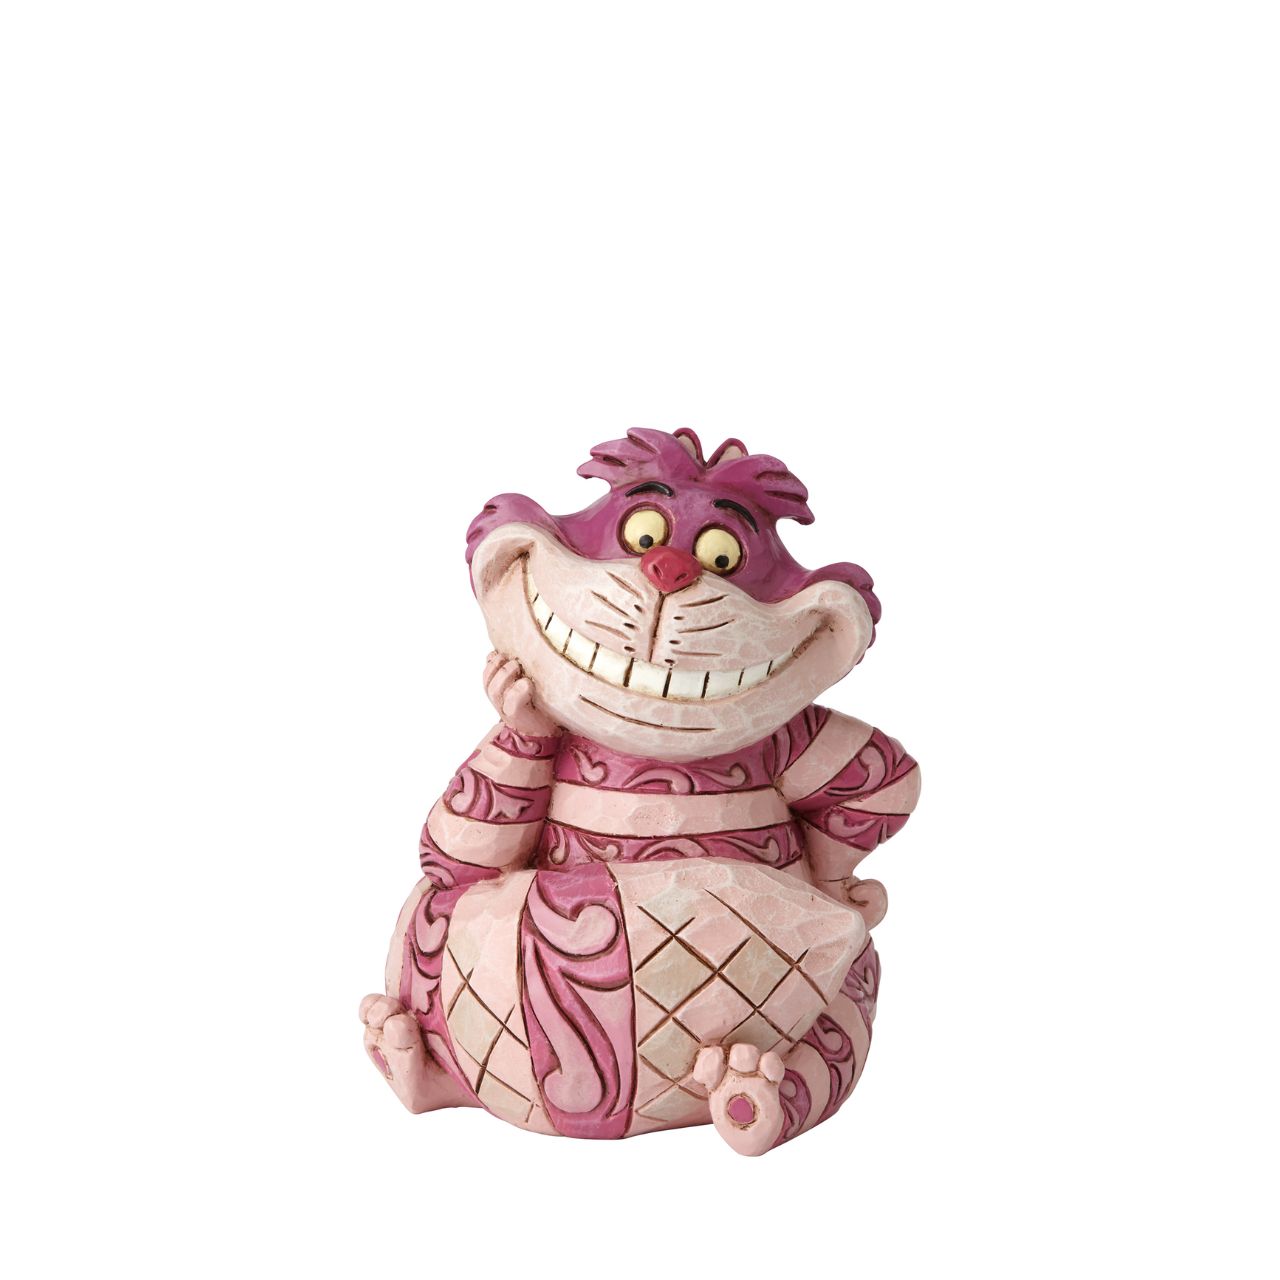 The mysterious Cheshire Cat from the Disney classic film Alice in Wonderland shows off his large smile in this mini figurine. Designed by Jim Shore for Disney Traditions now available in the mini collection.